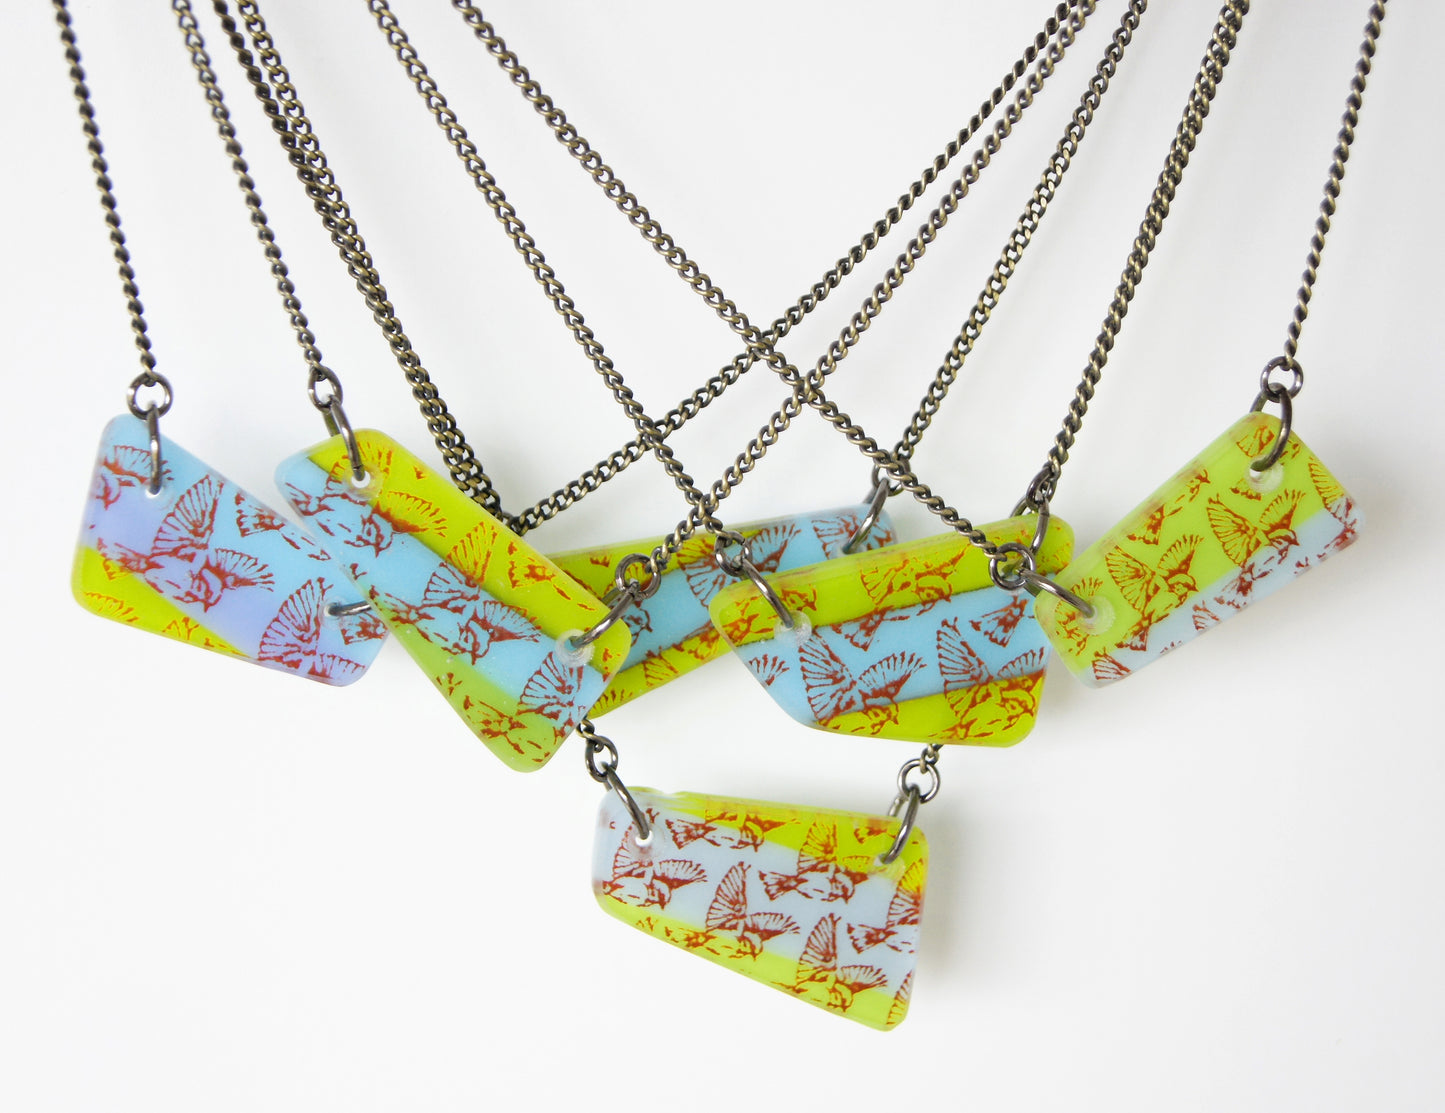 Handmade collection of one of a kind flying bird necklaces. 